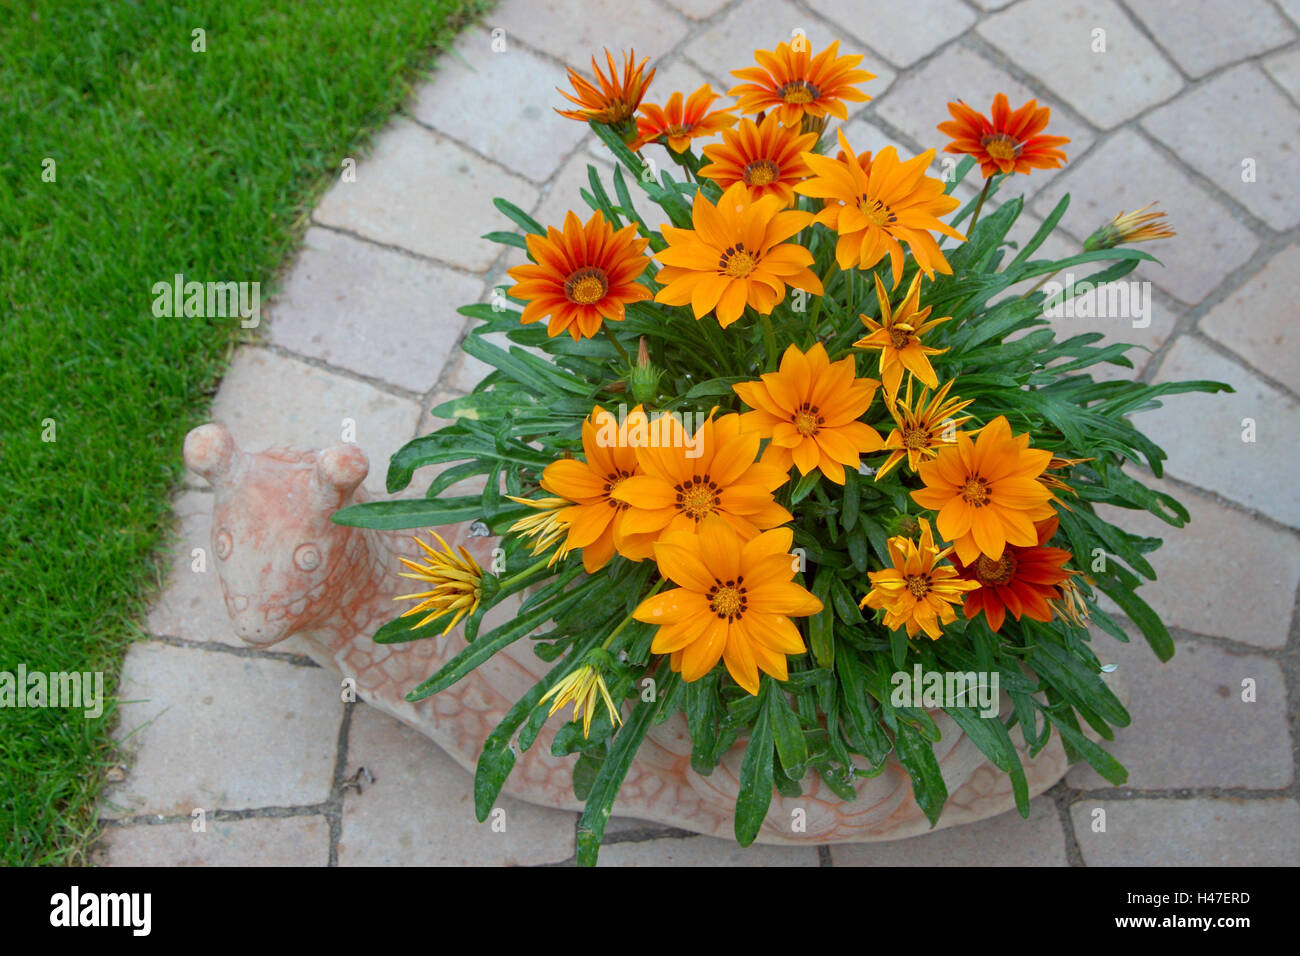 Garden figure with midday flowers, Stock Photo